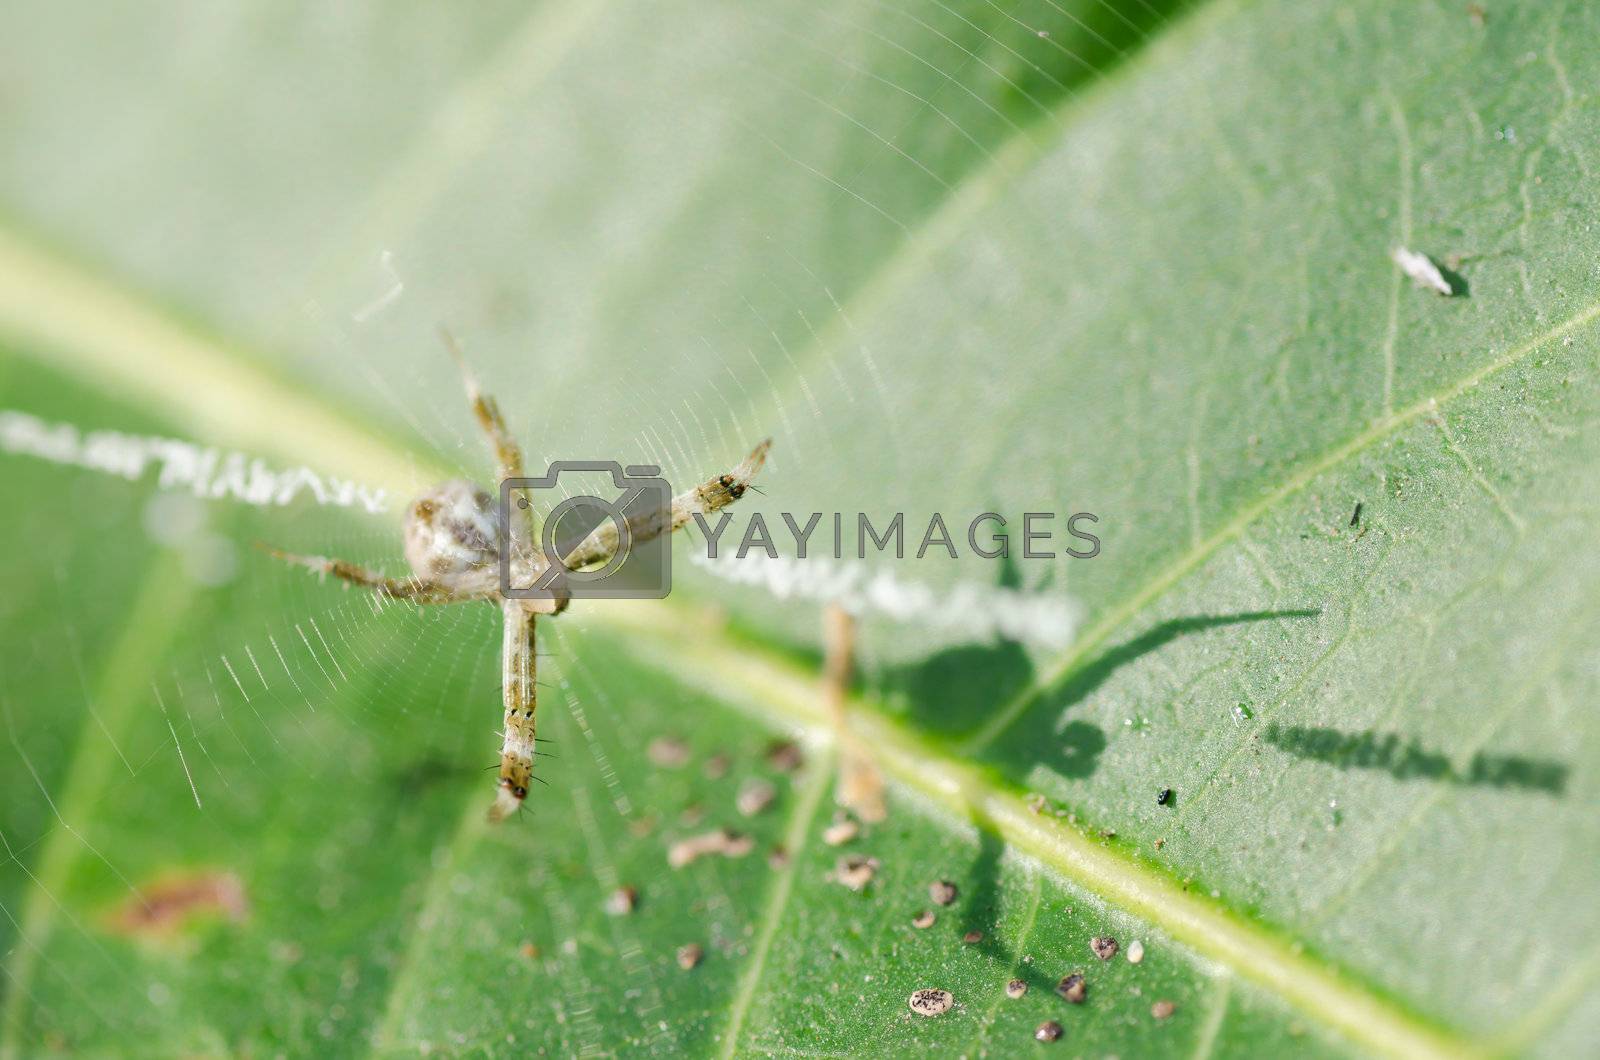 Royalty free image of spider in the nature by sweetcrisis